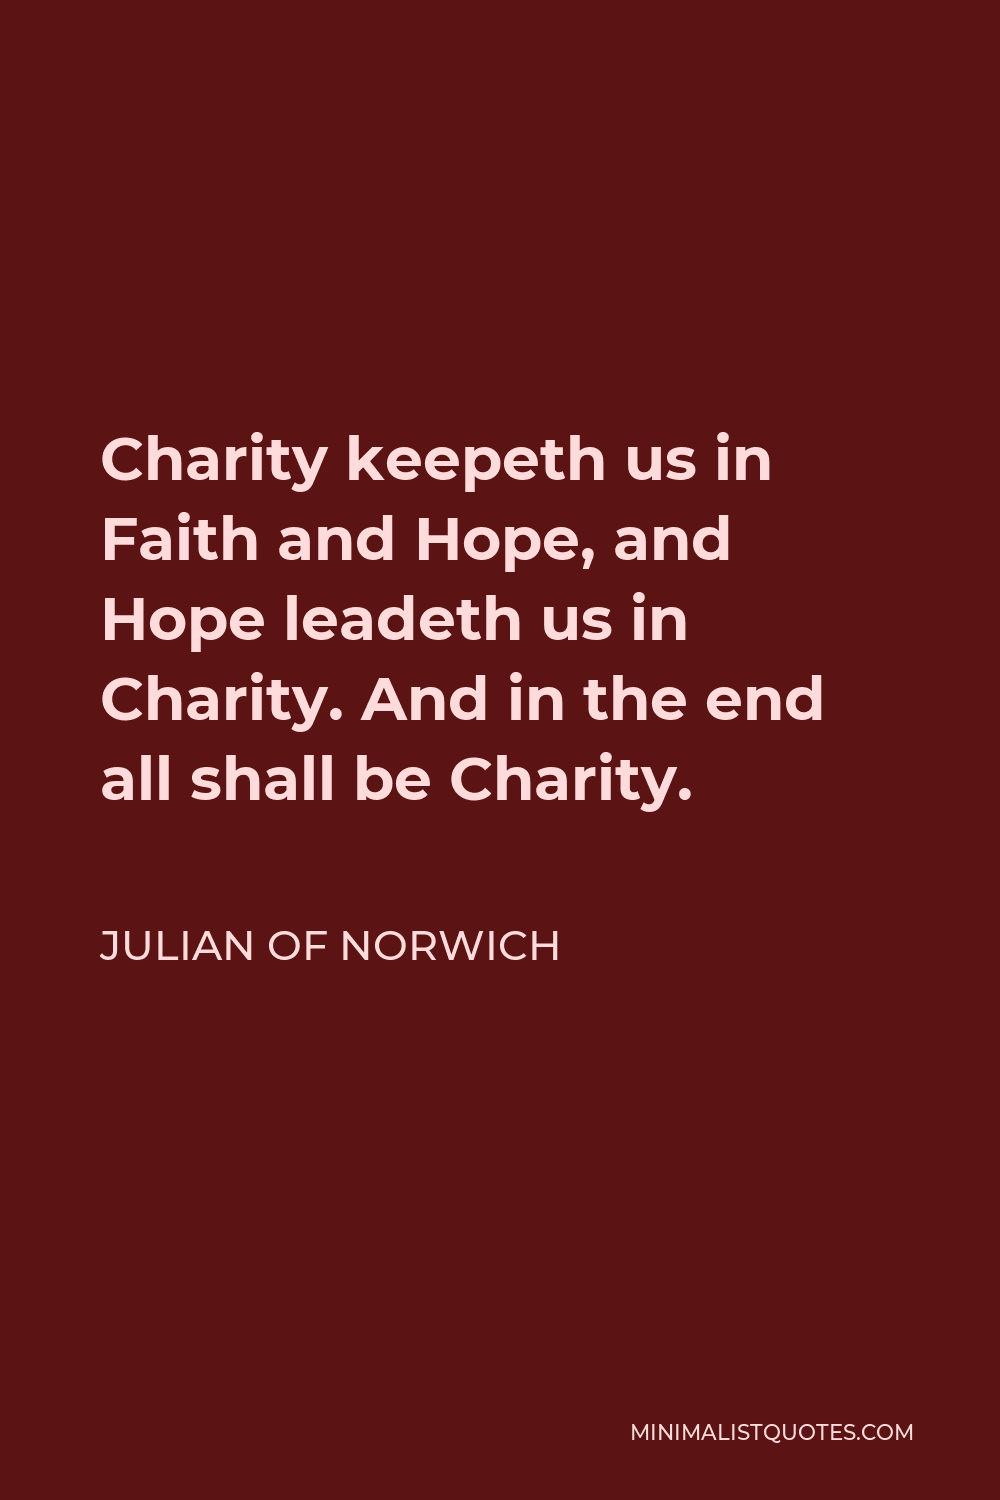 Julian of Norwich Quote - Charity keepeth us in Faith and Hope, and Hope leadeth us in Charity. And in the end all shall be Charity.